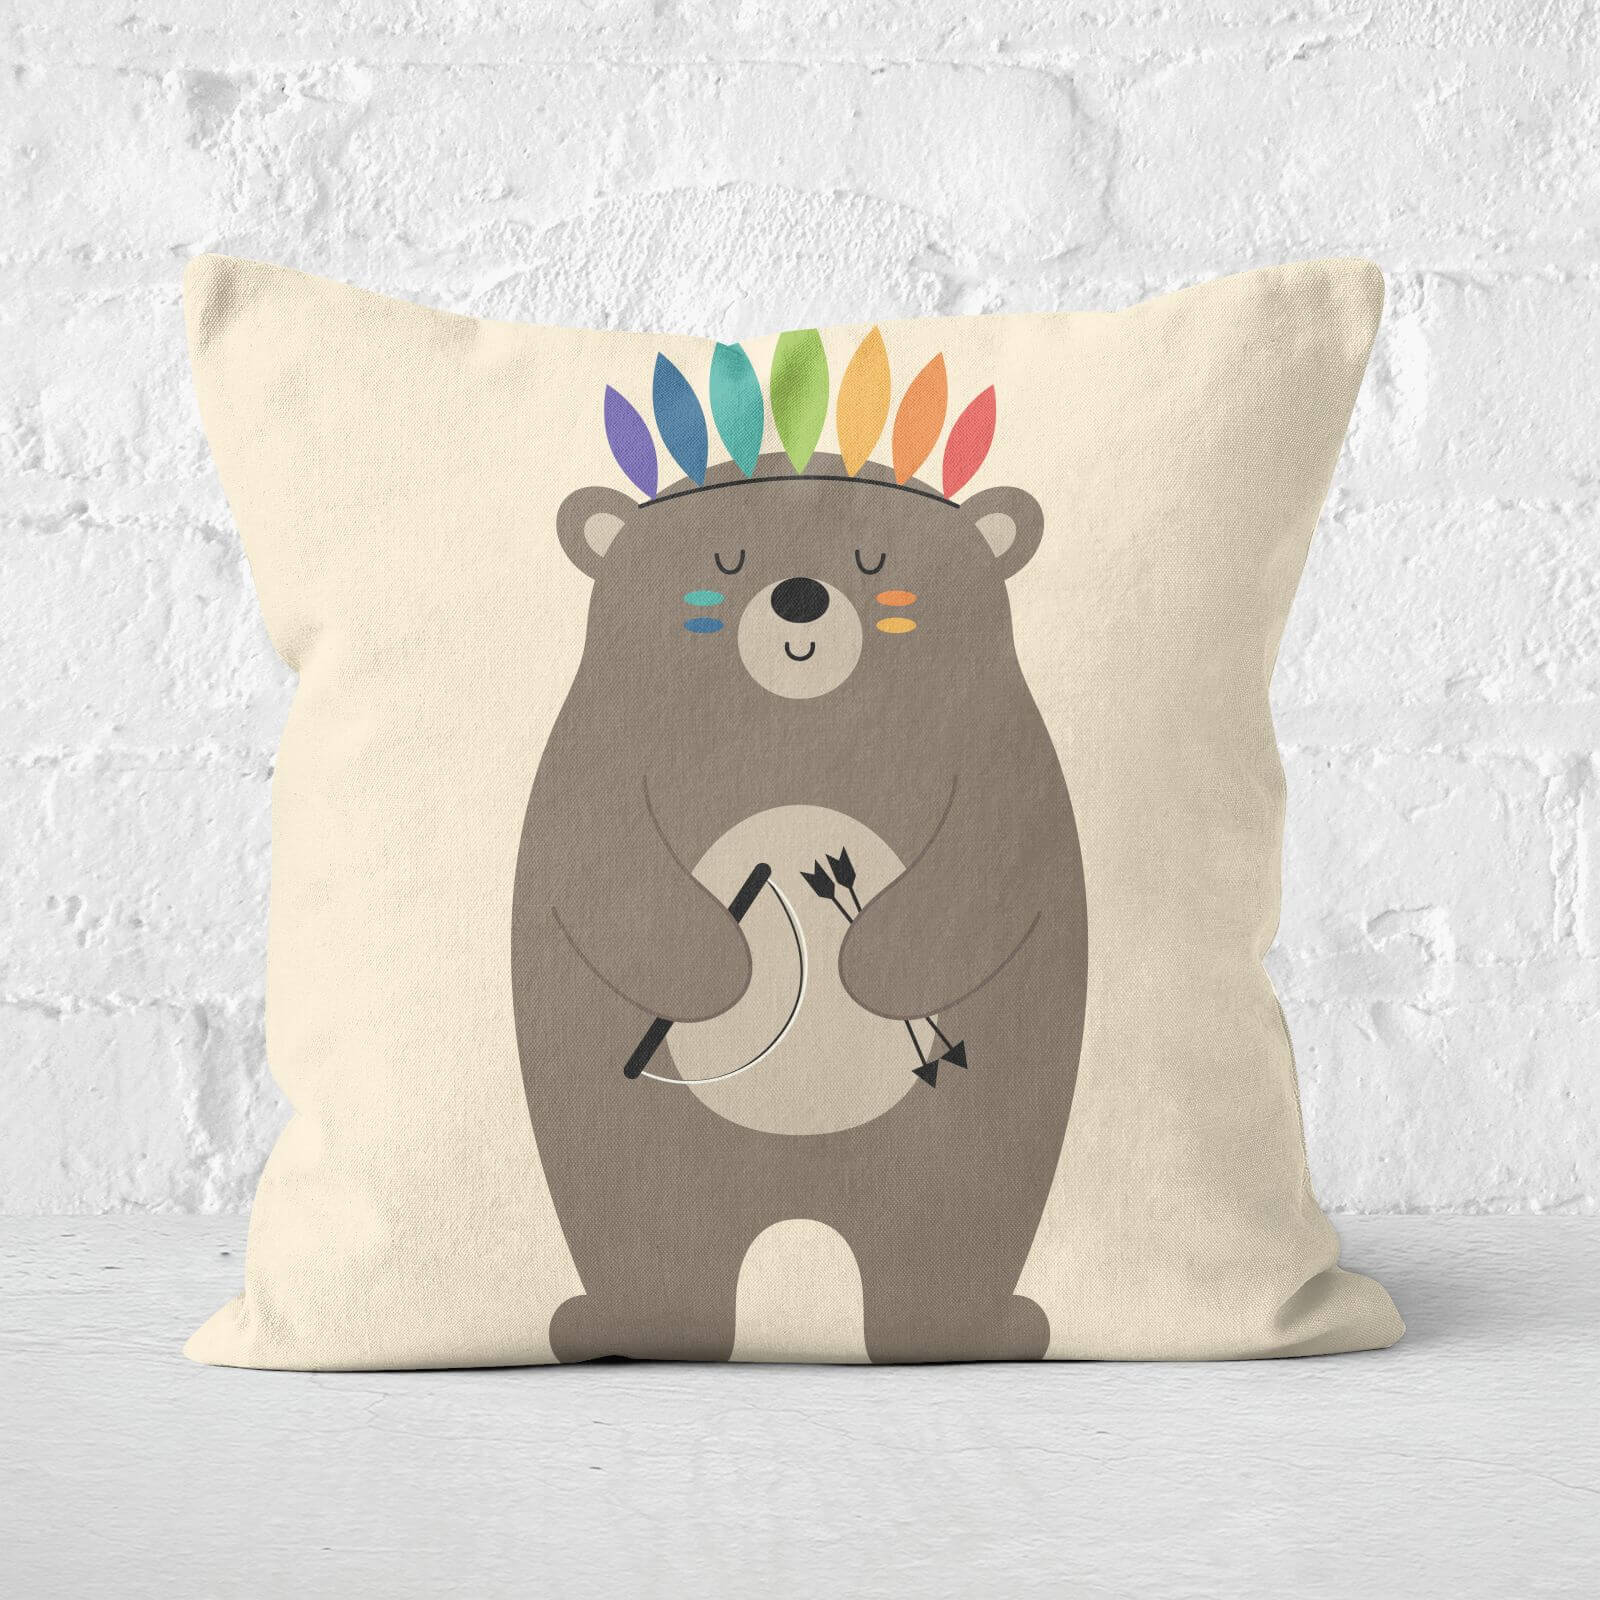 Andy Westface Be Brave Square Cushion - 60x60cm - Soft Touch